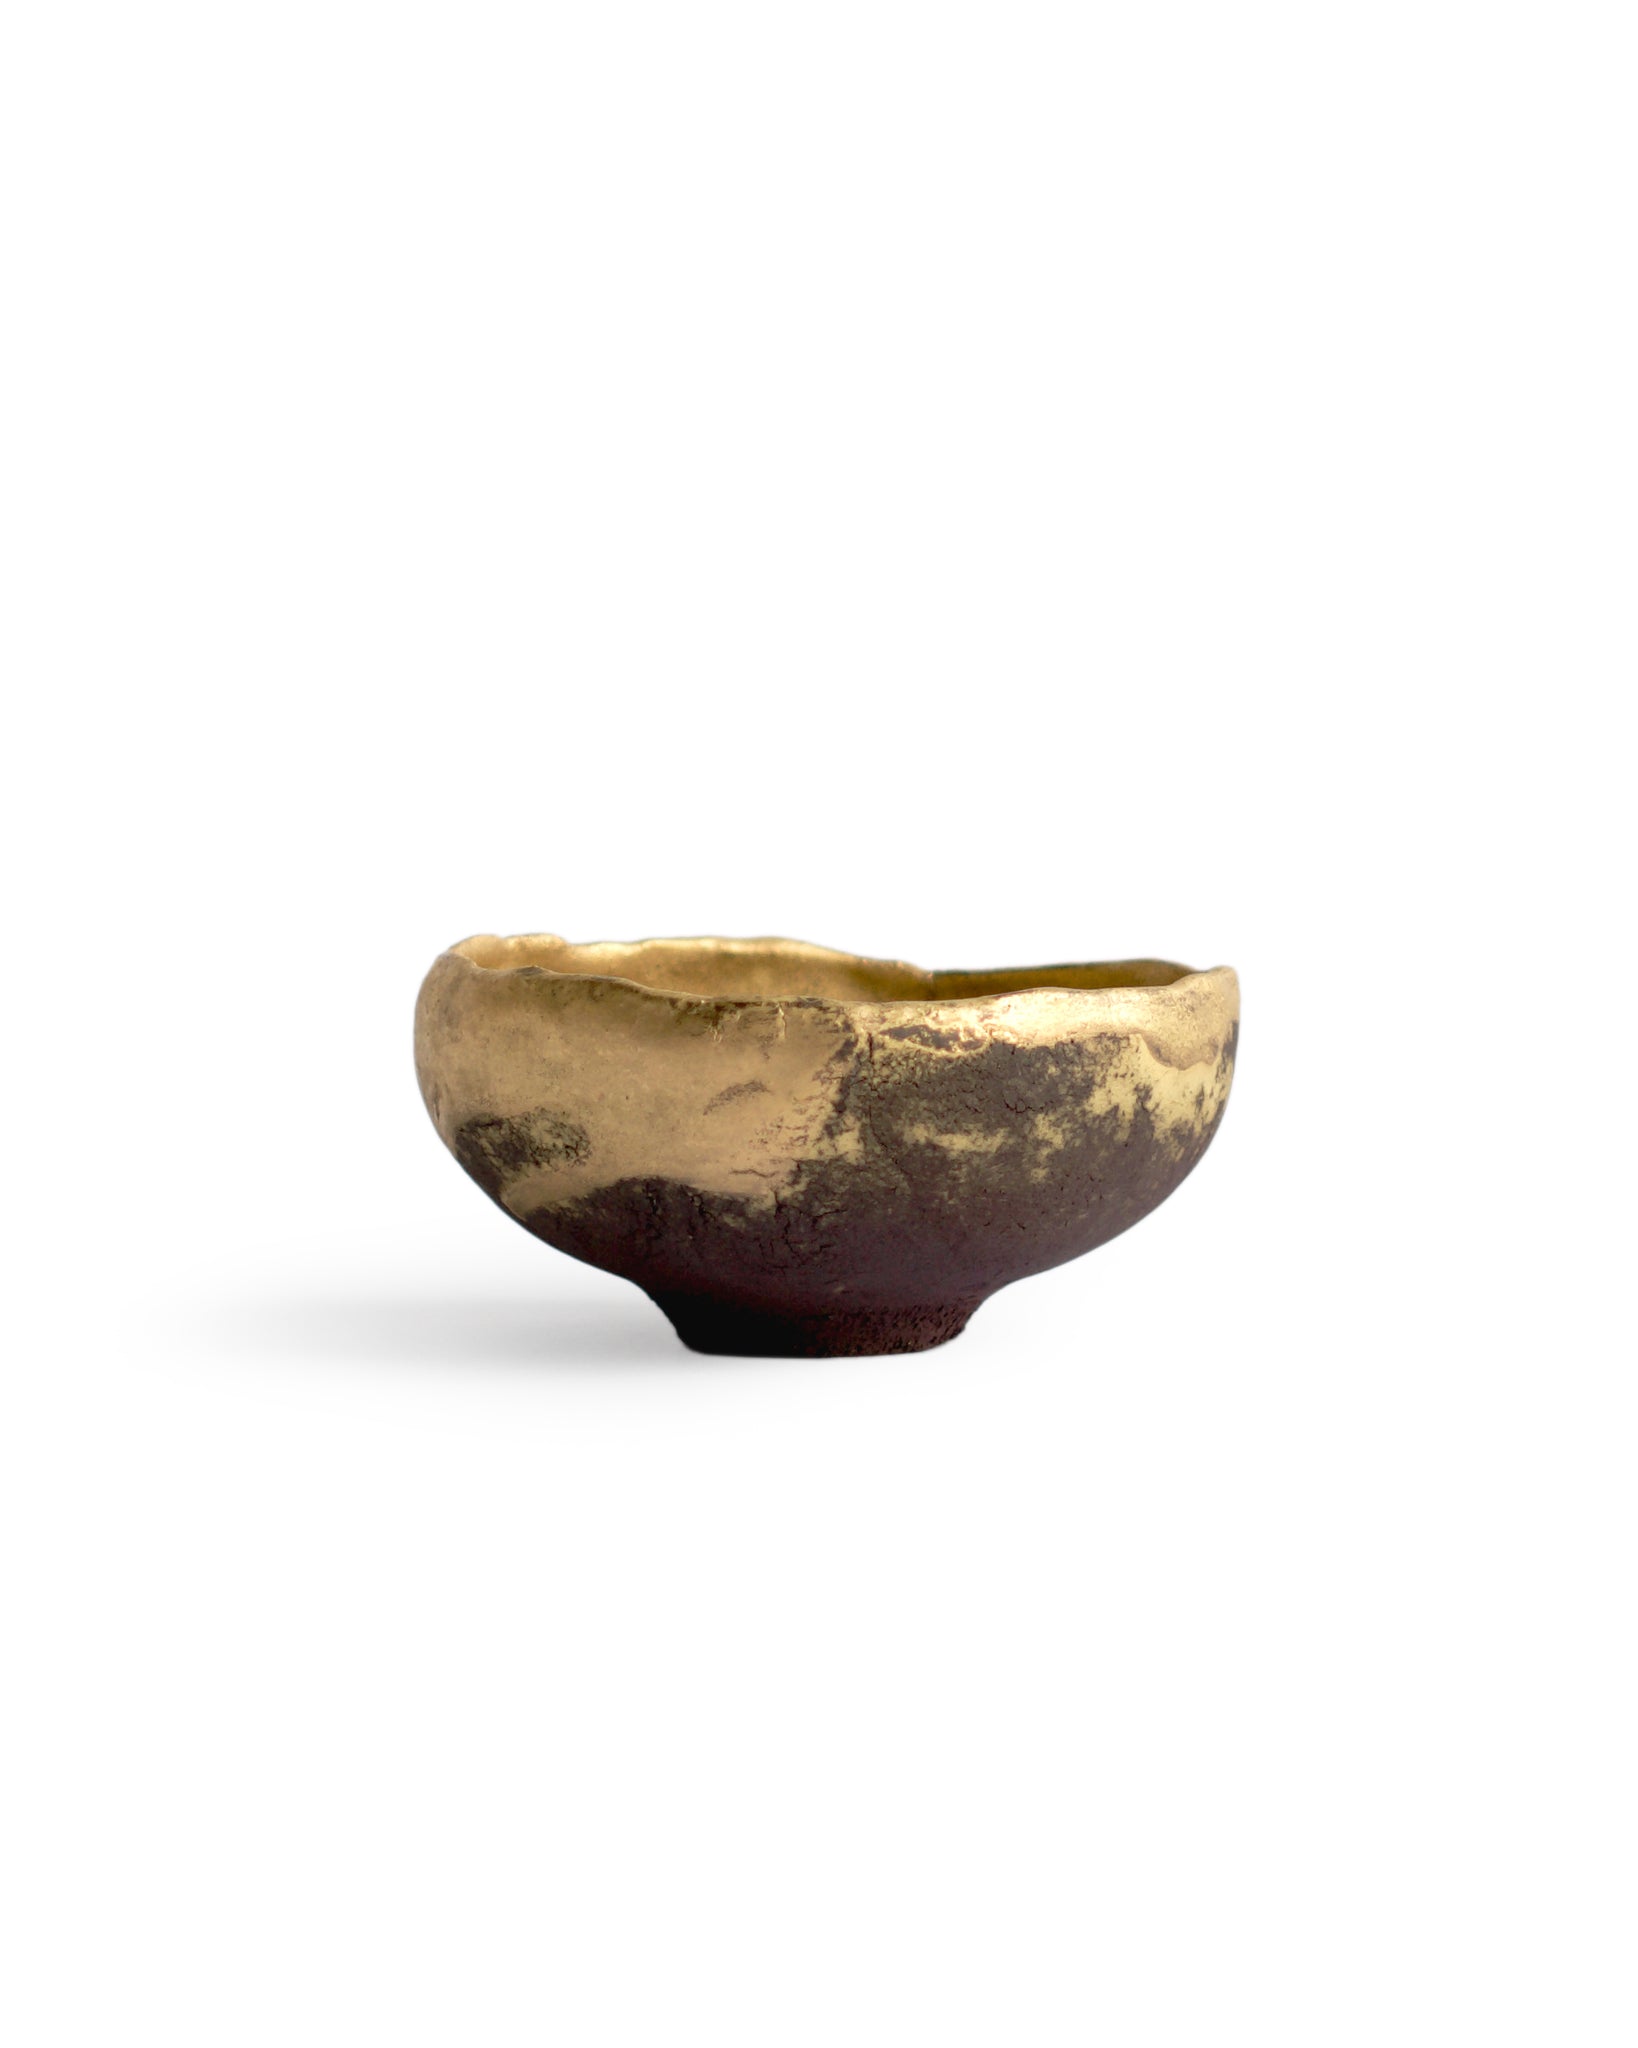 Gold Chawan VII silhouetted against white background.